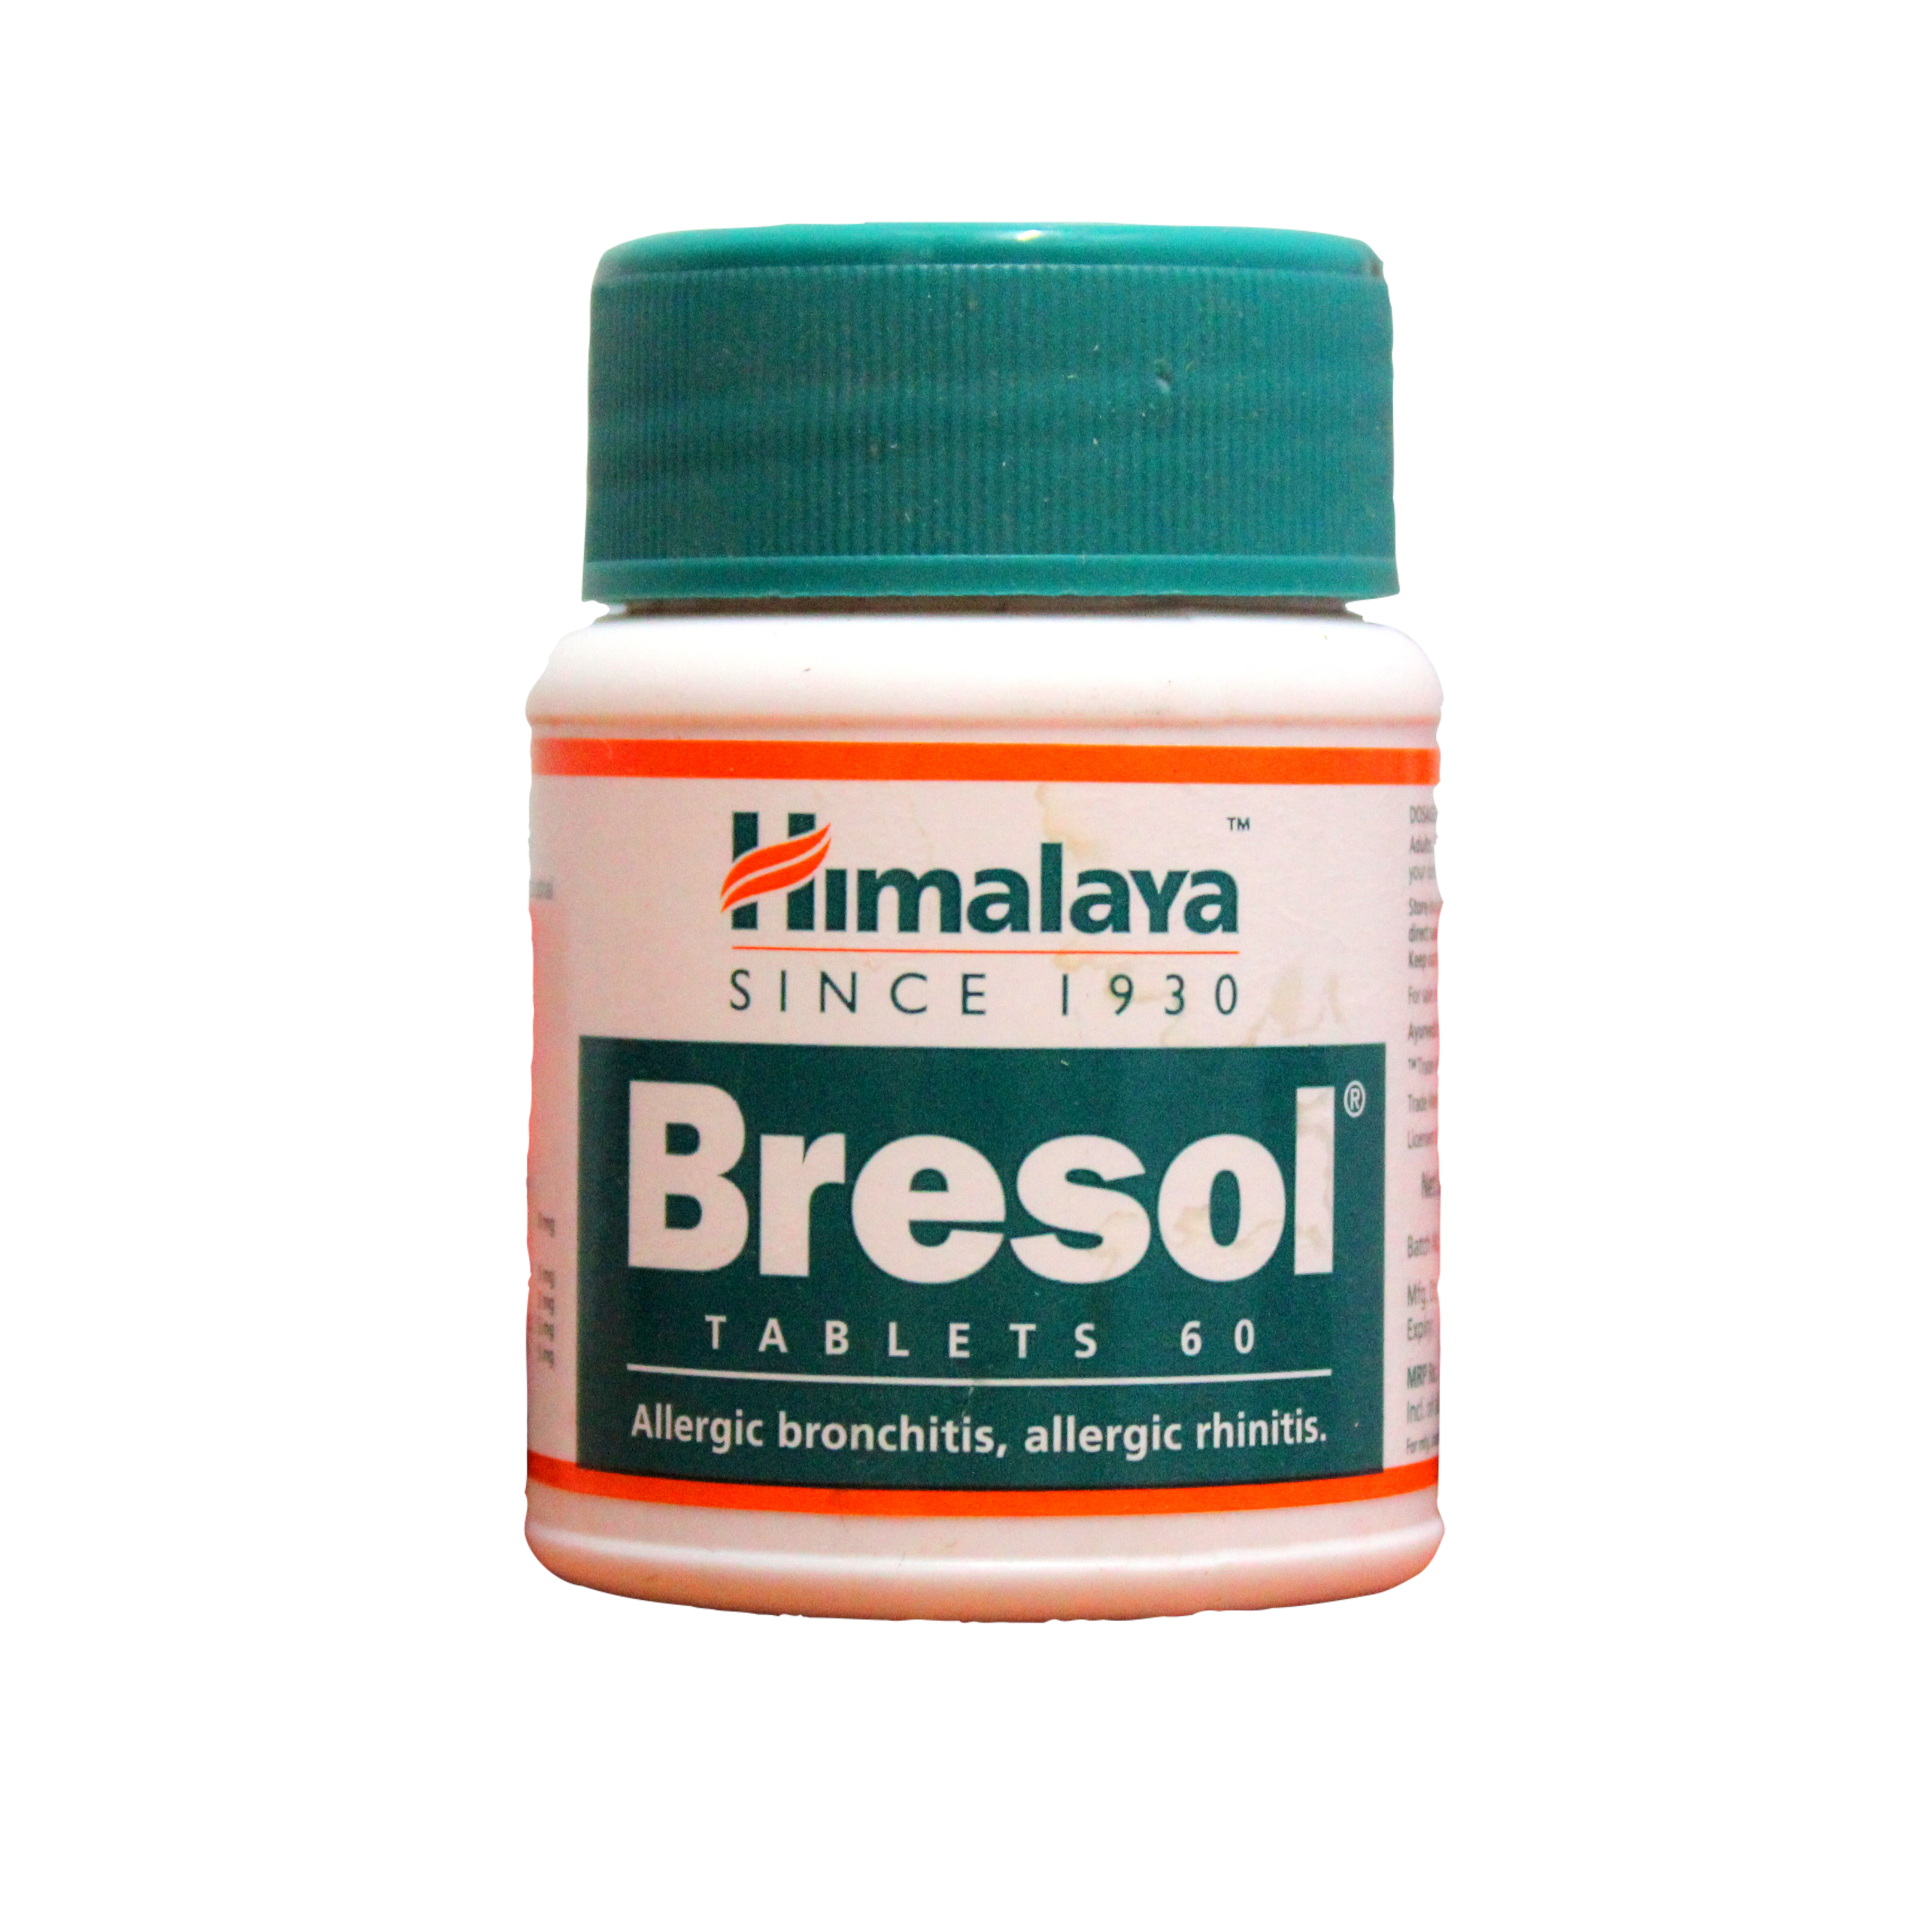 Shop Bresol tablets - 60tablets at price 150.00 from Himalaya Online - Ayush Care